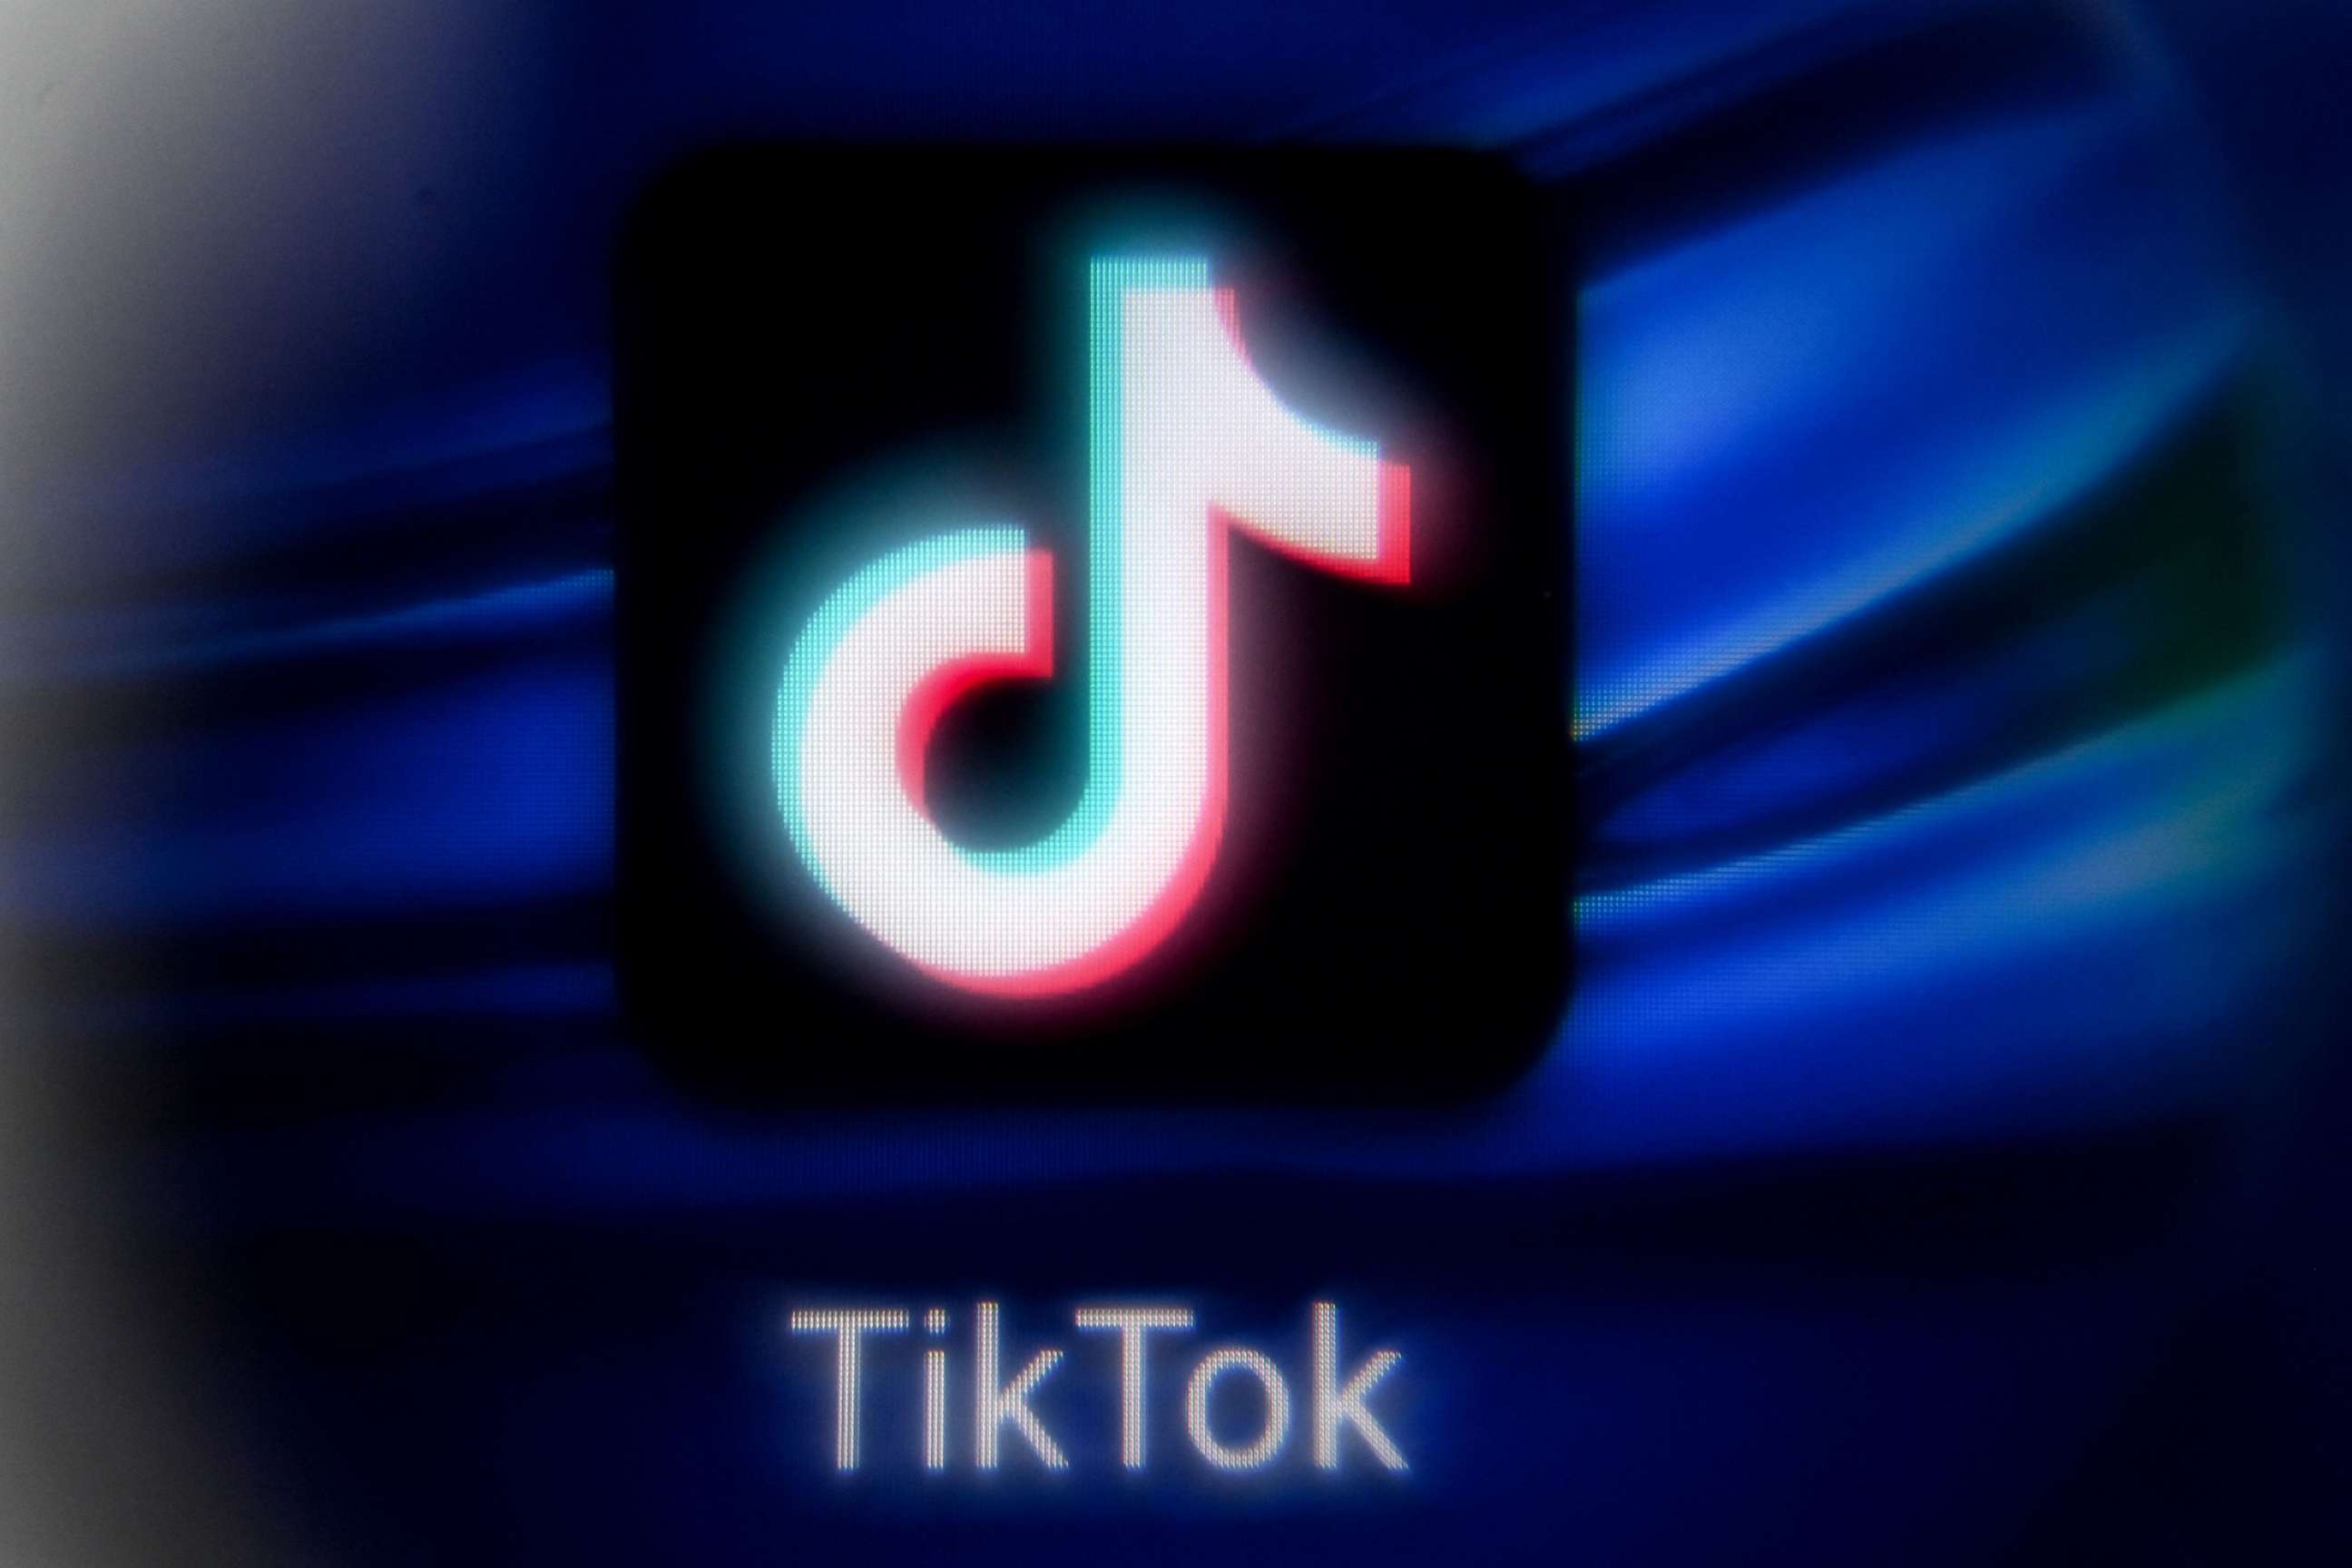 PHOTO: This file picture taken in Moscow on Nov. 11, 2021, shows the Chinese social networking service TikTok's logo on a tablet screen.